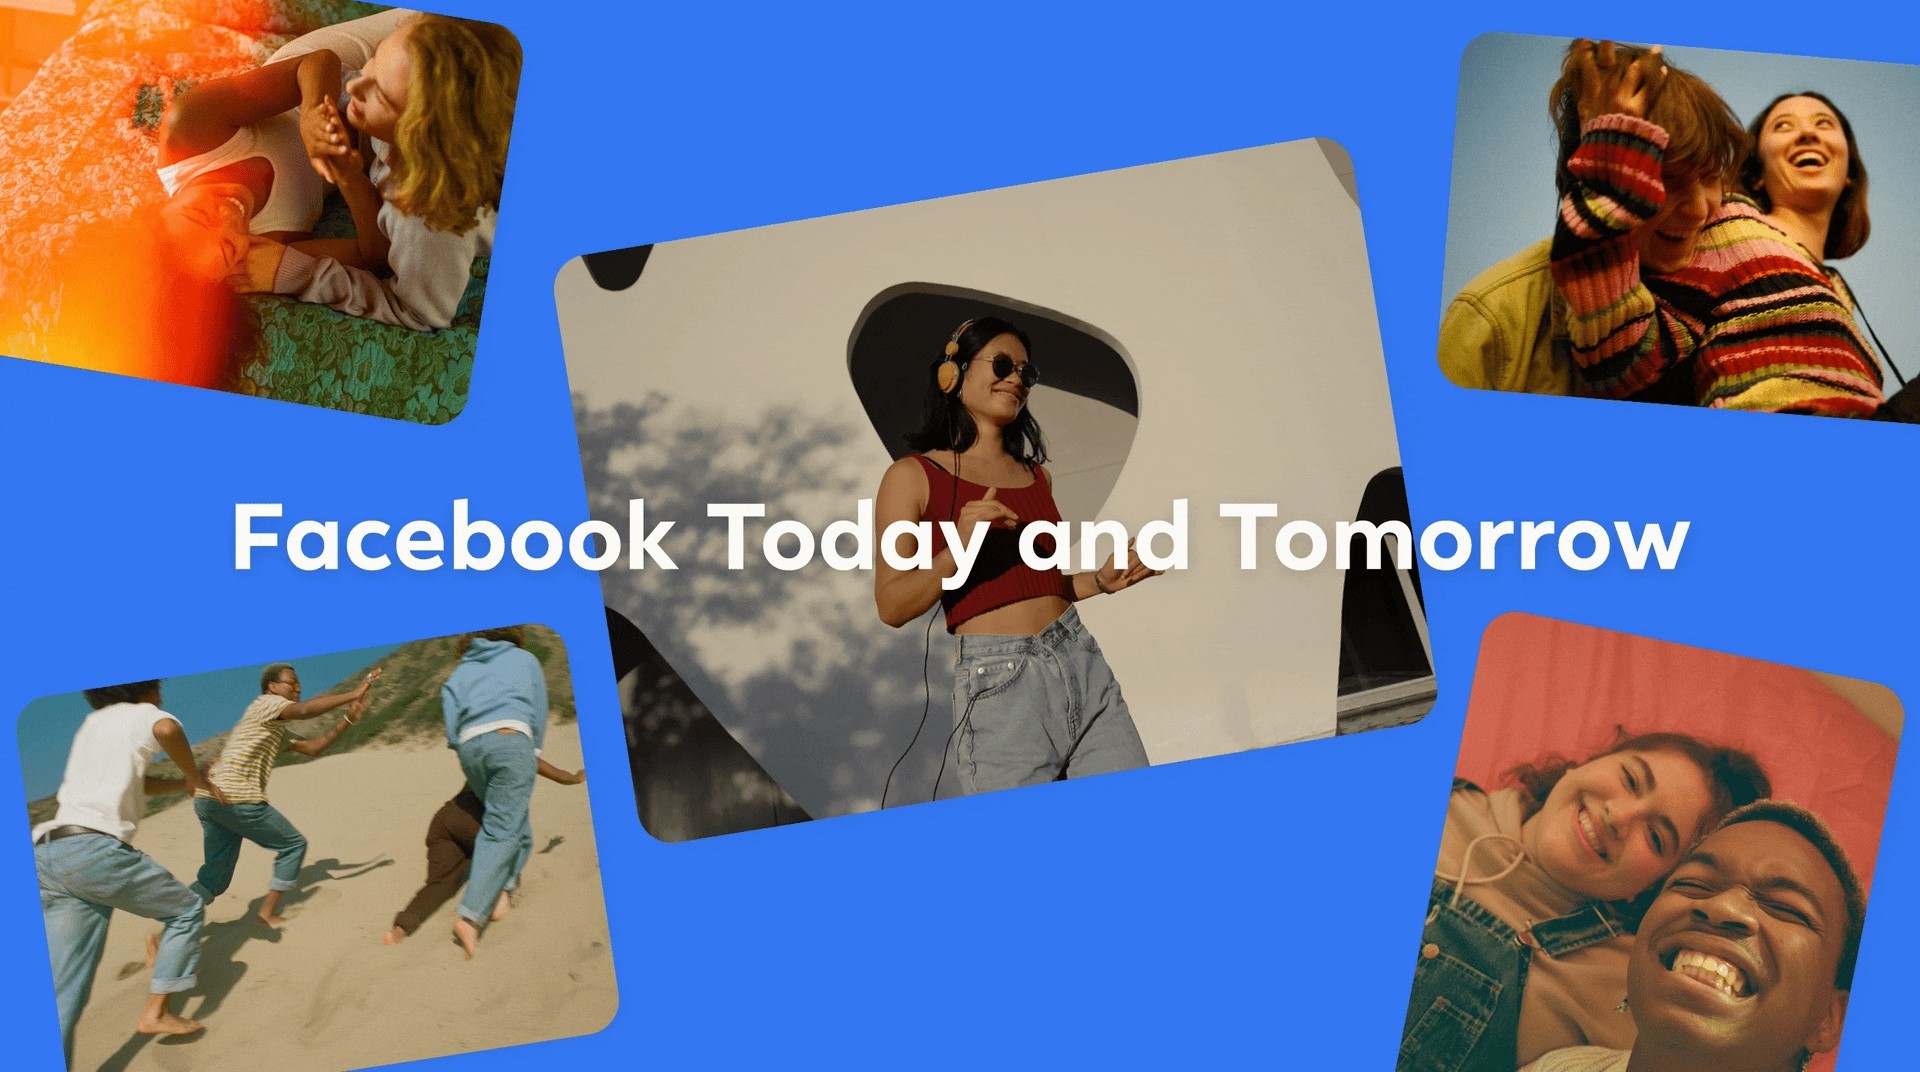 Facebook: 2 billion daily active users, and Messenger will be back within the app